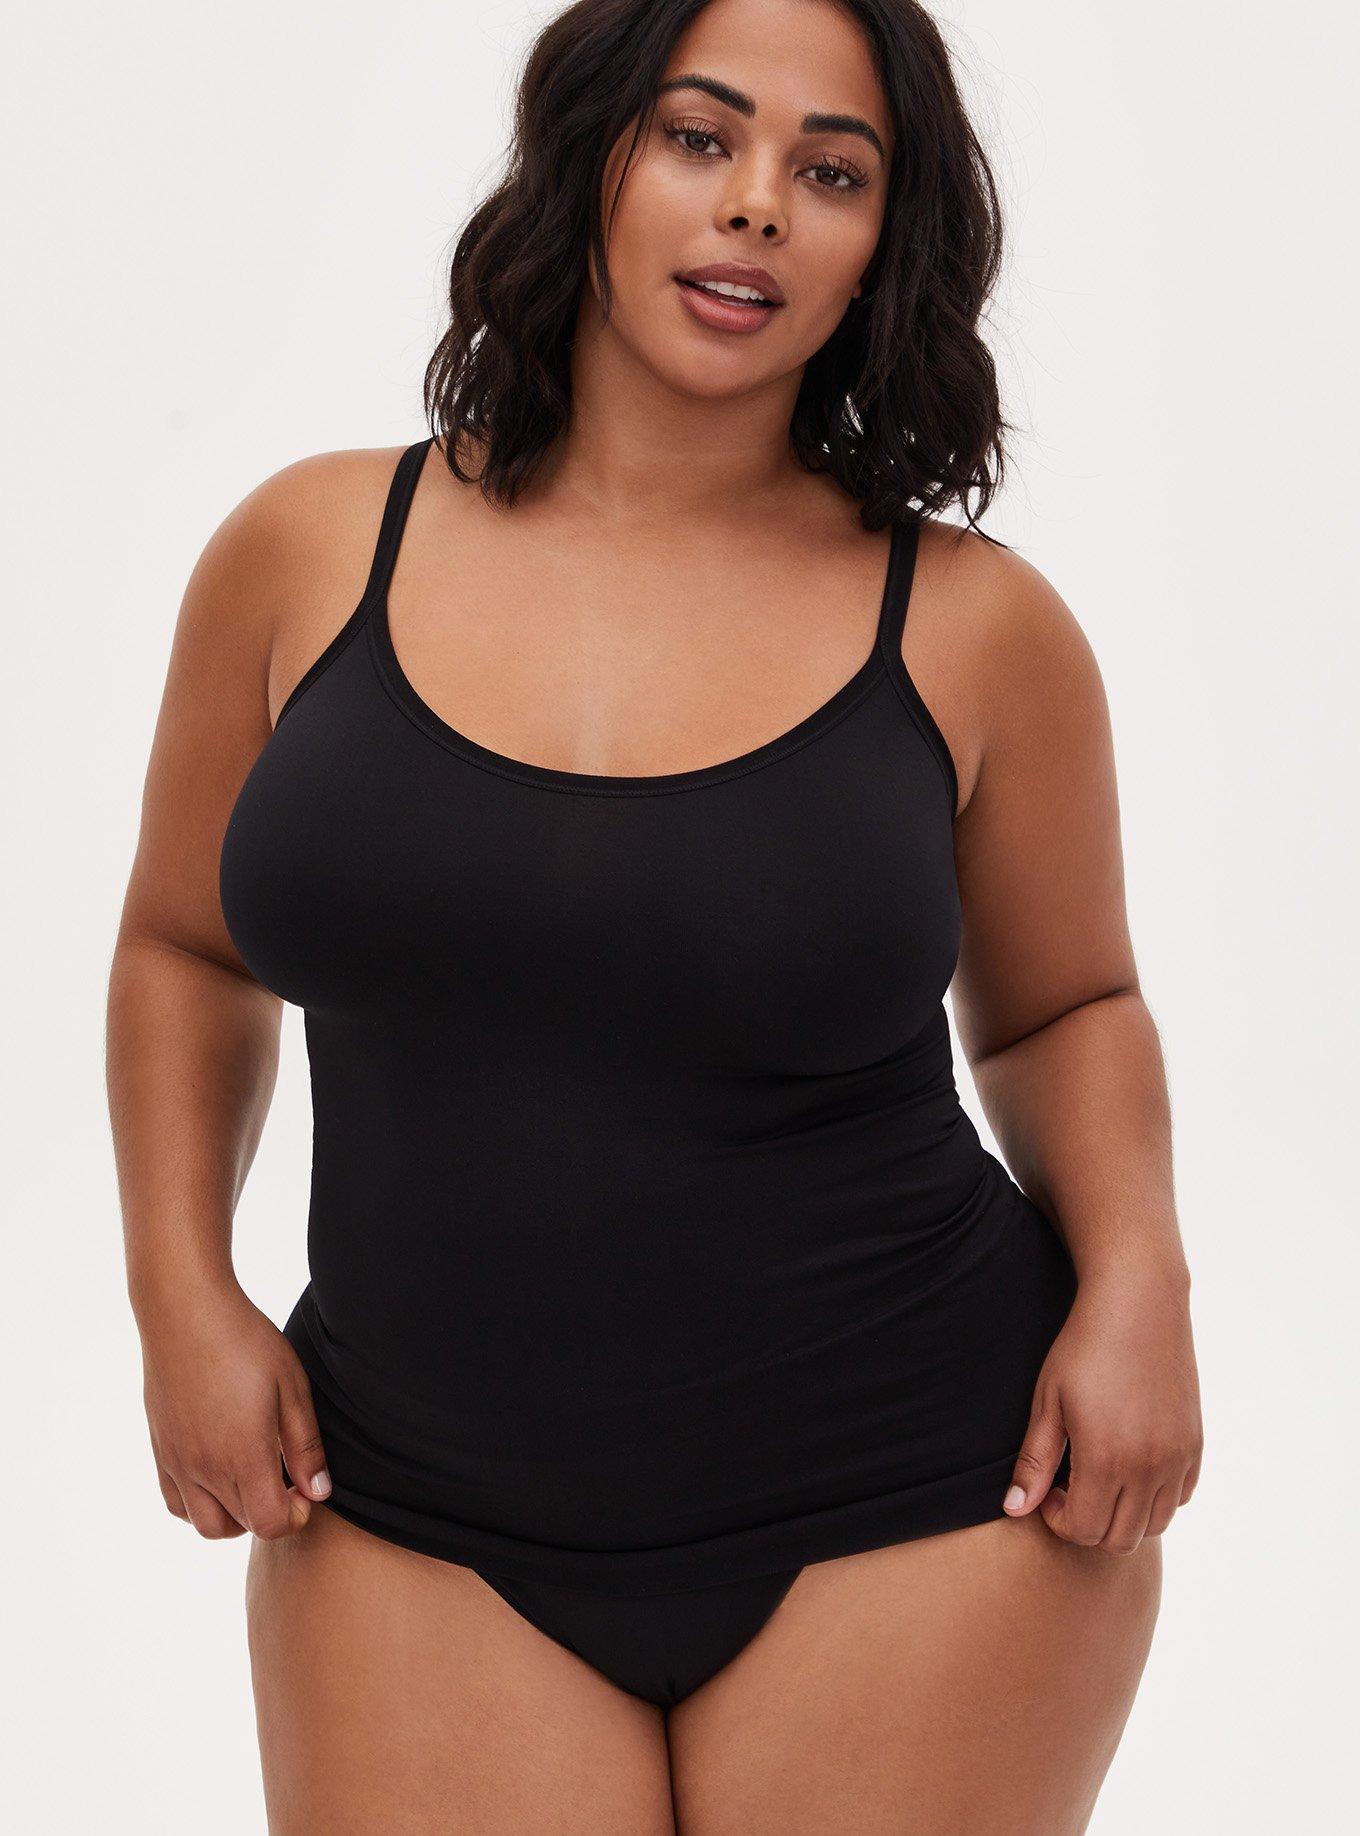 ASSETS by SPANX Women's Plus Size Smoothing Tank Top - Black 1X